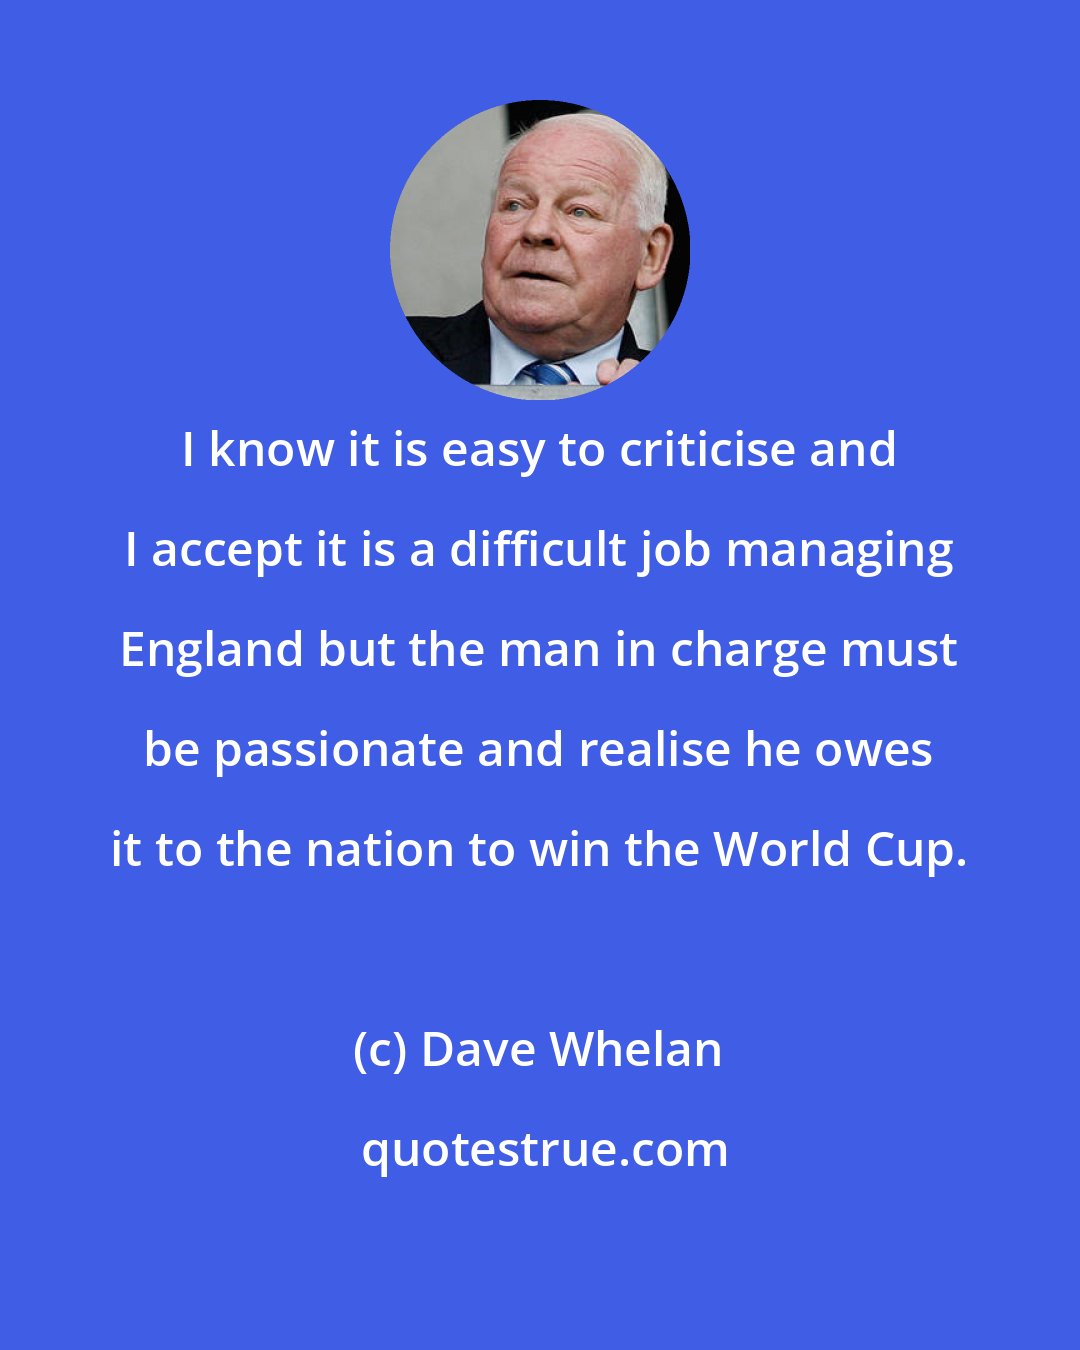 Dave Whelan: I know it is easy to criticise and I accept it is a difficult job managing England but the man in charge must be passionate and realise he owes it to the nation to win the World Cup.